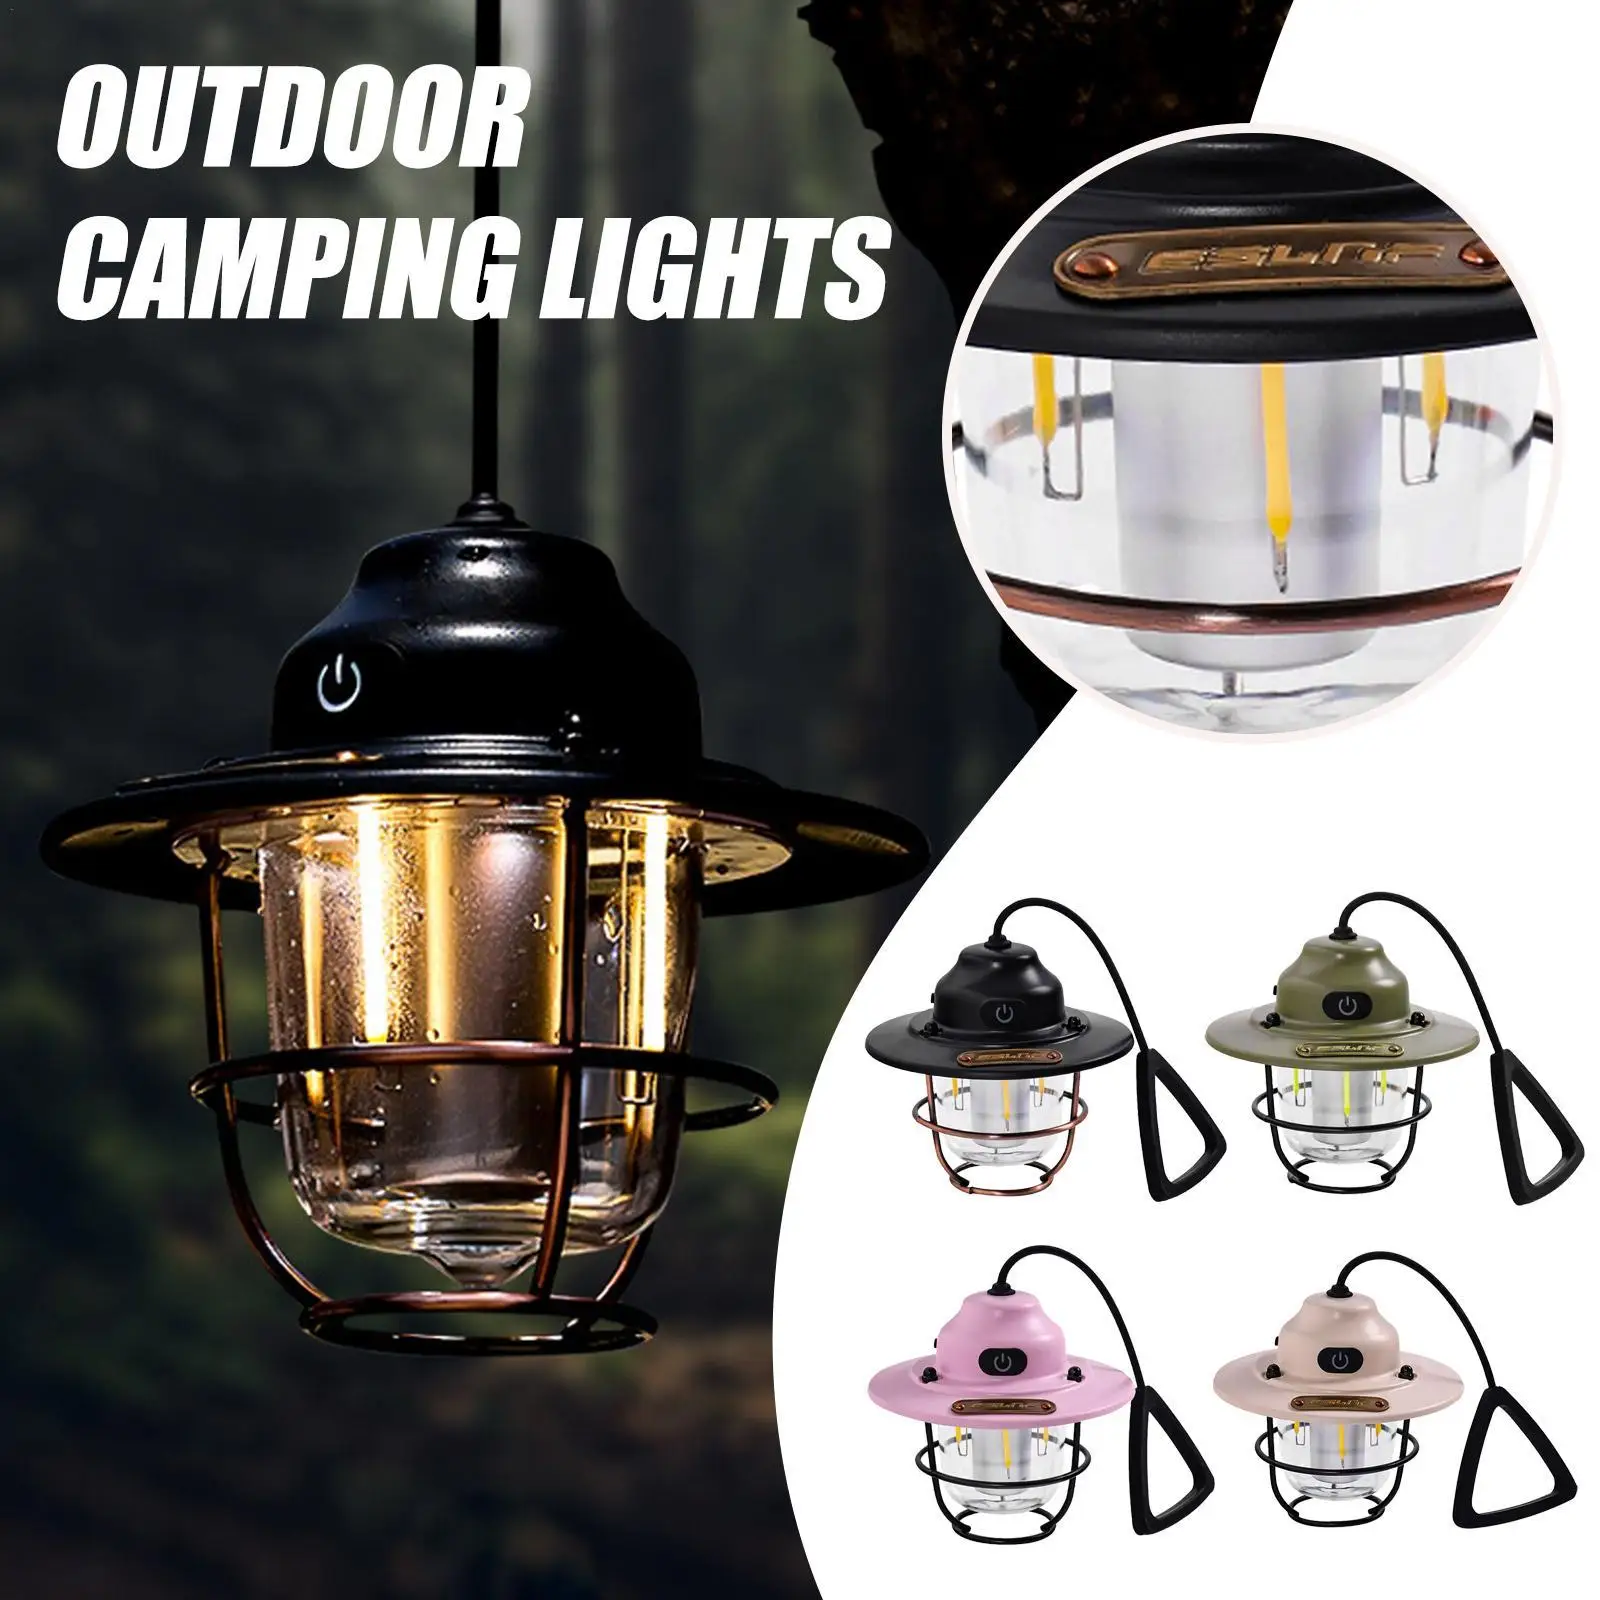 Retro Camping Light Mini Portable Camping Lantern USB Charge IPX4 Waterproof Camp Lamo For Outdoor LED Tent Light